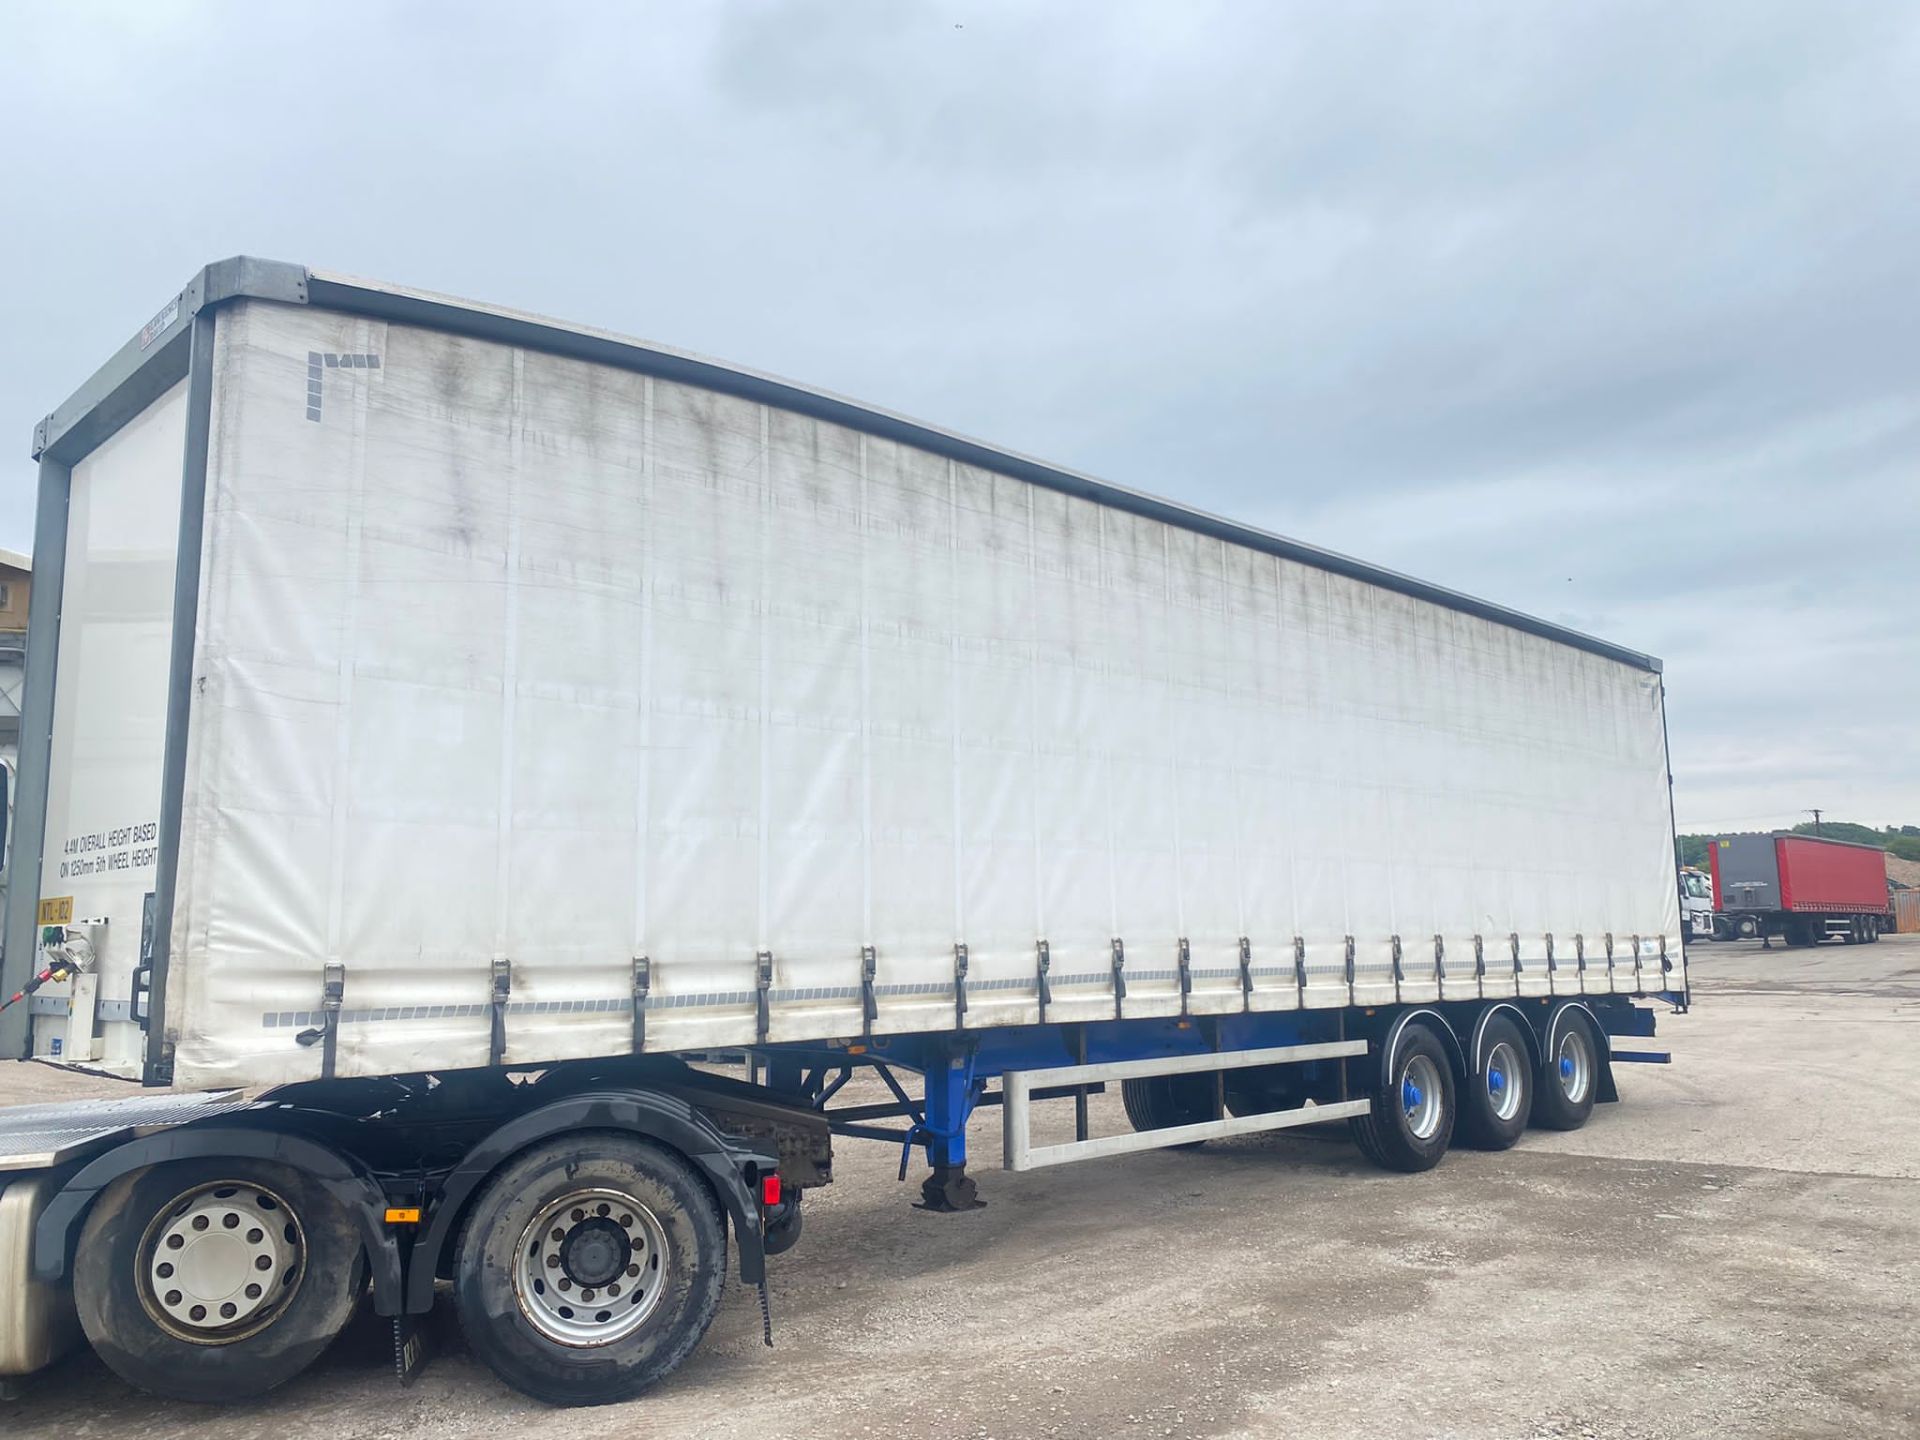 2016 MODEL LAWRENCE DAVID XL CURTAIN SIDE TRAILER - 4.4 METRES HIGH - Image 5 of 6